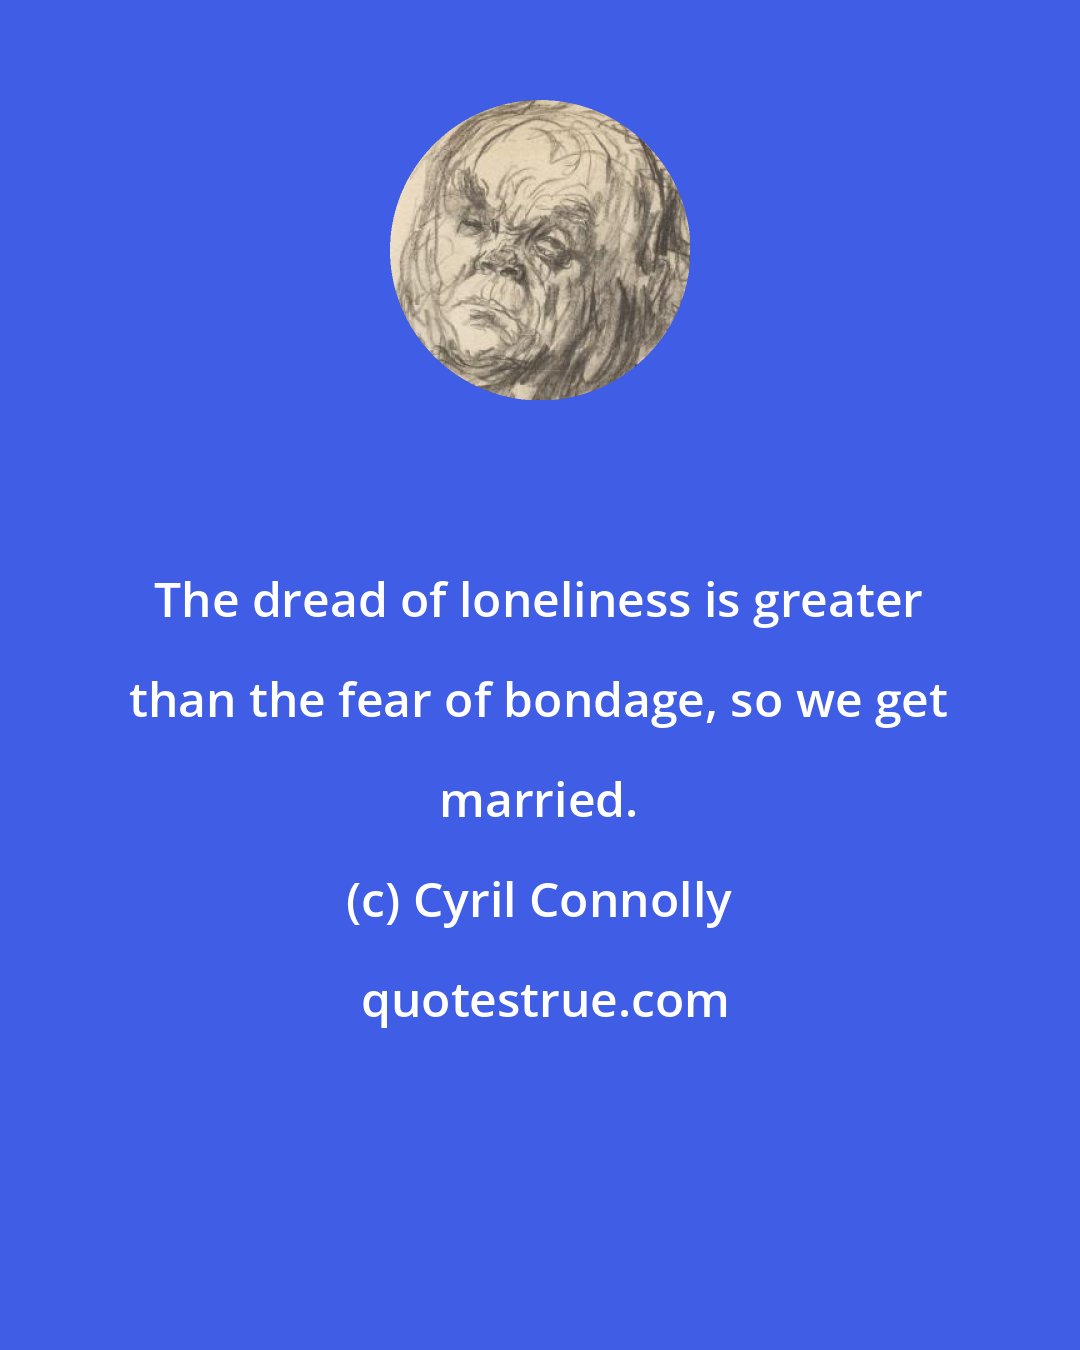 Cyril Connolly: The dread of loneliness is greater than the fear of bondage, so we get married.